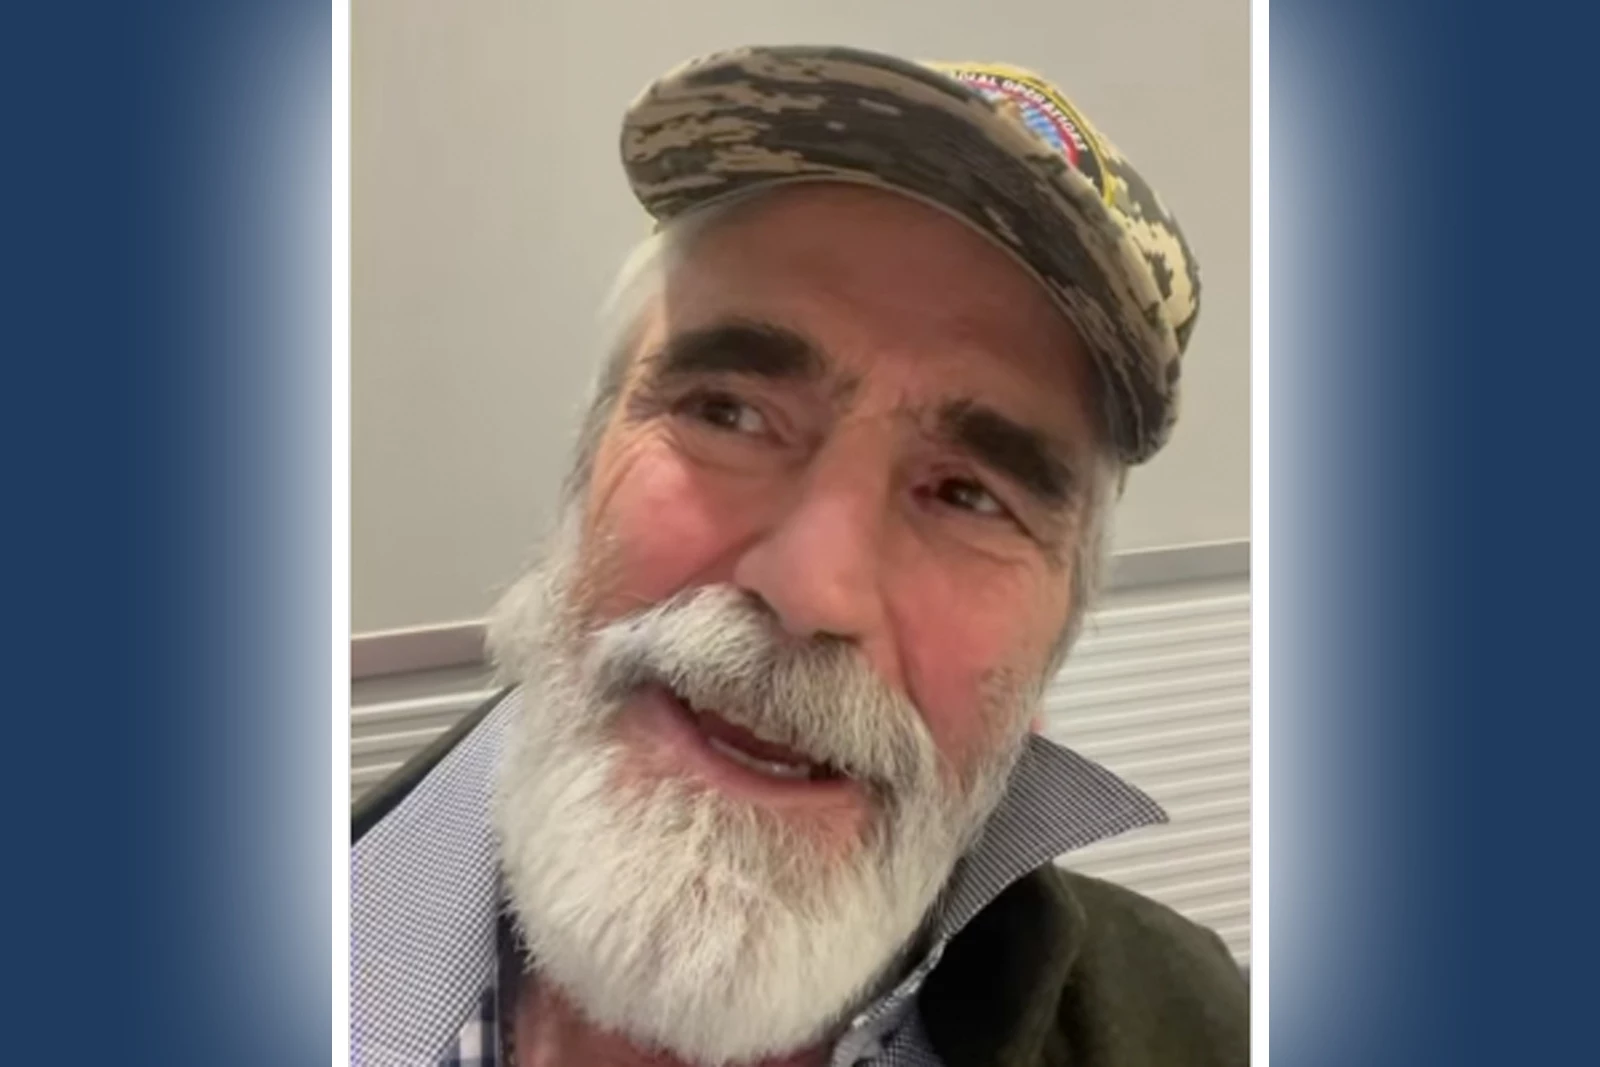 Picture of Forrie J. Smith from his social media video